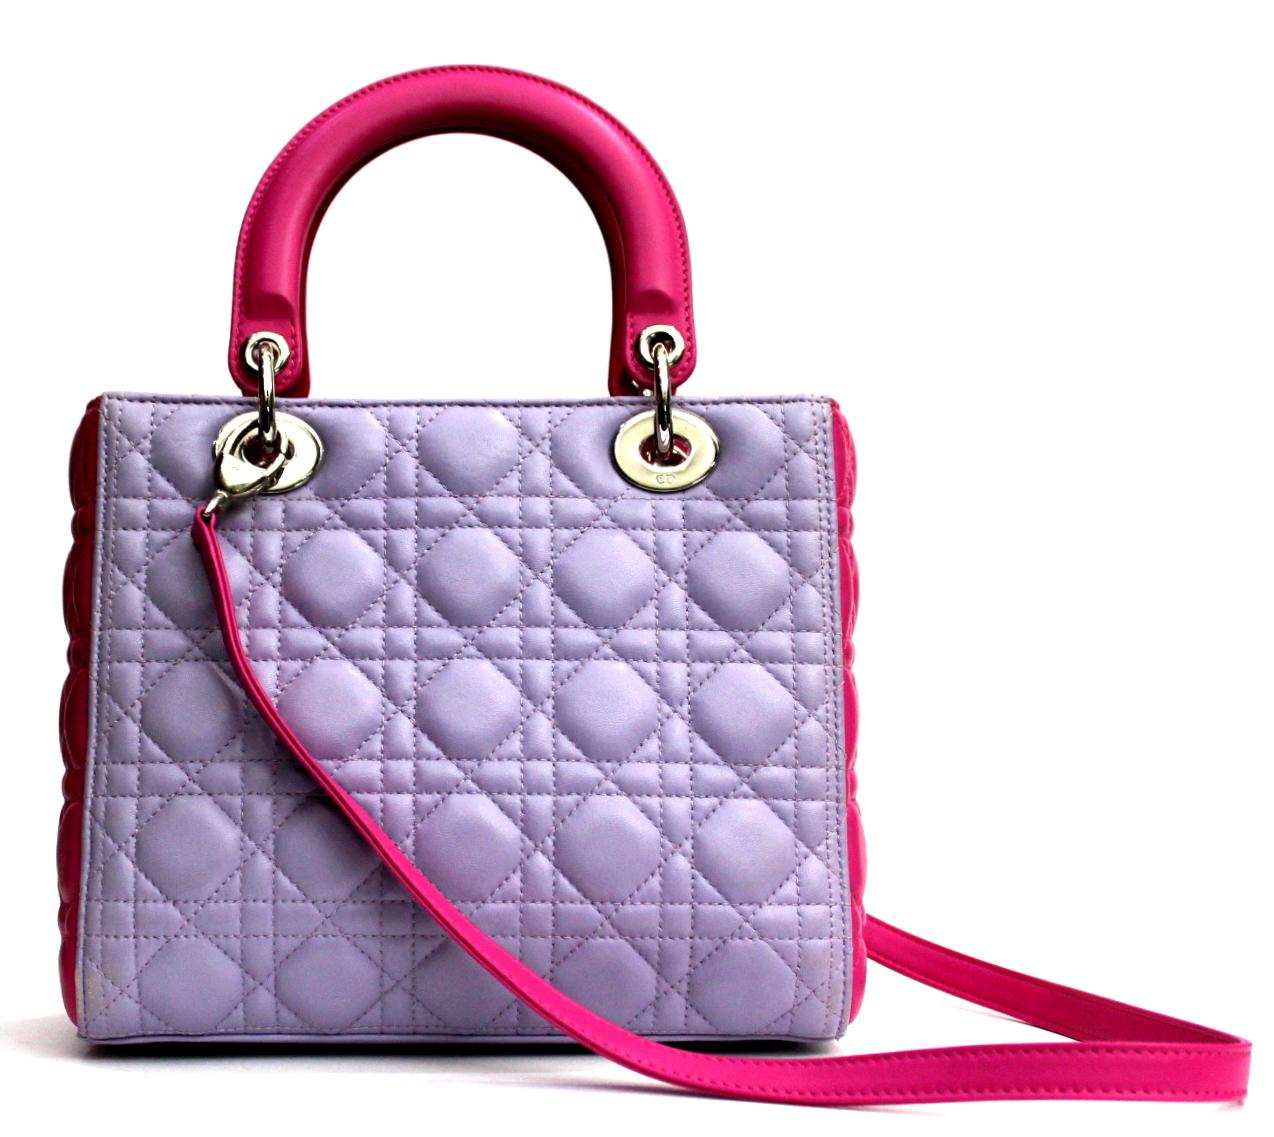 Superb Lady Dior Tricolor handbag in medium-sized quilted lambskin. This Dior presents a fun color combination: fuchsia and lilac, with silver hardware. On the front side enriched with a Dior charms. Equipped with double handle and shoulder strap